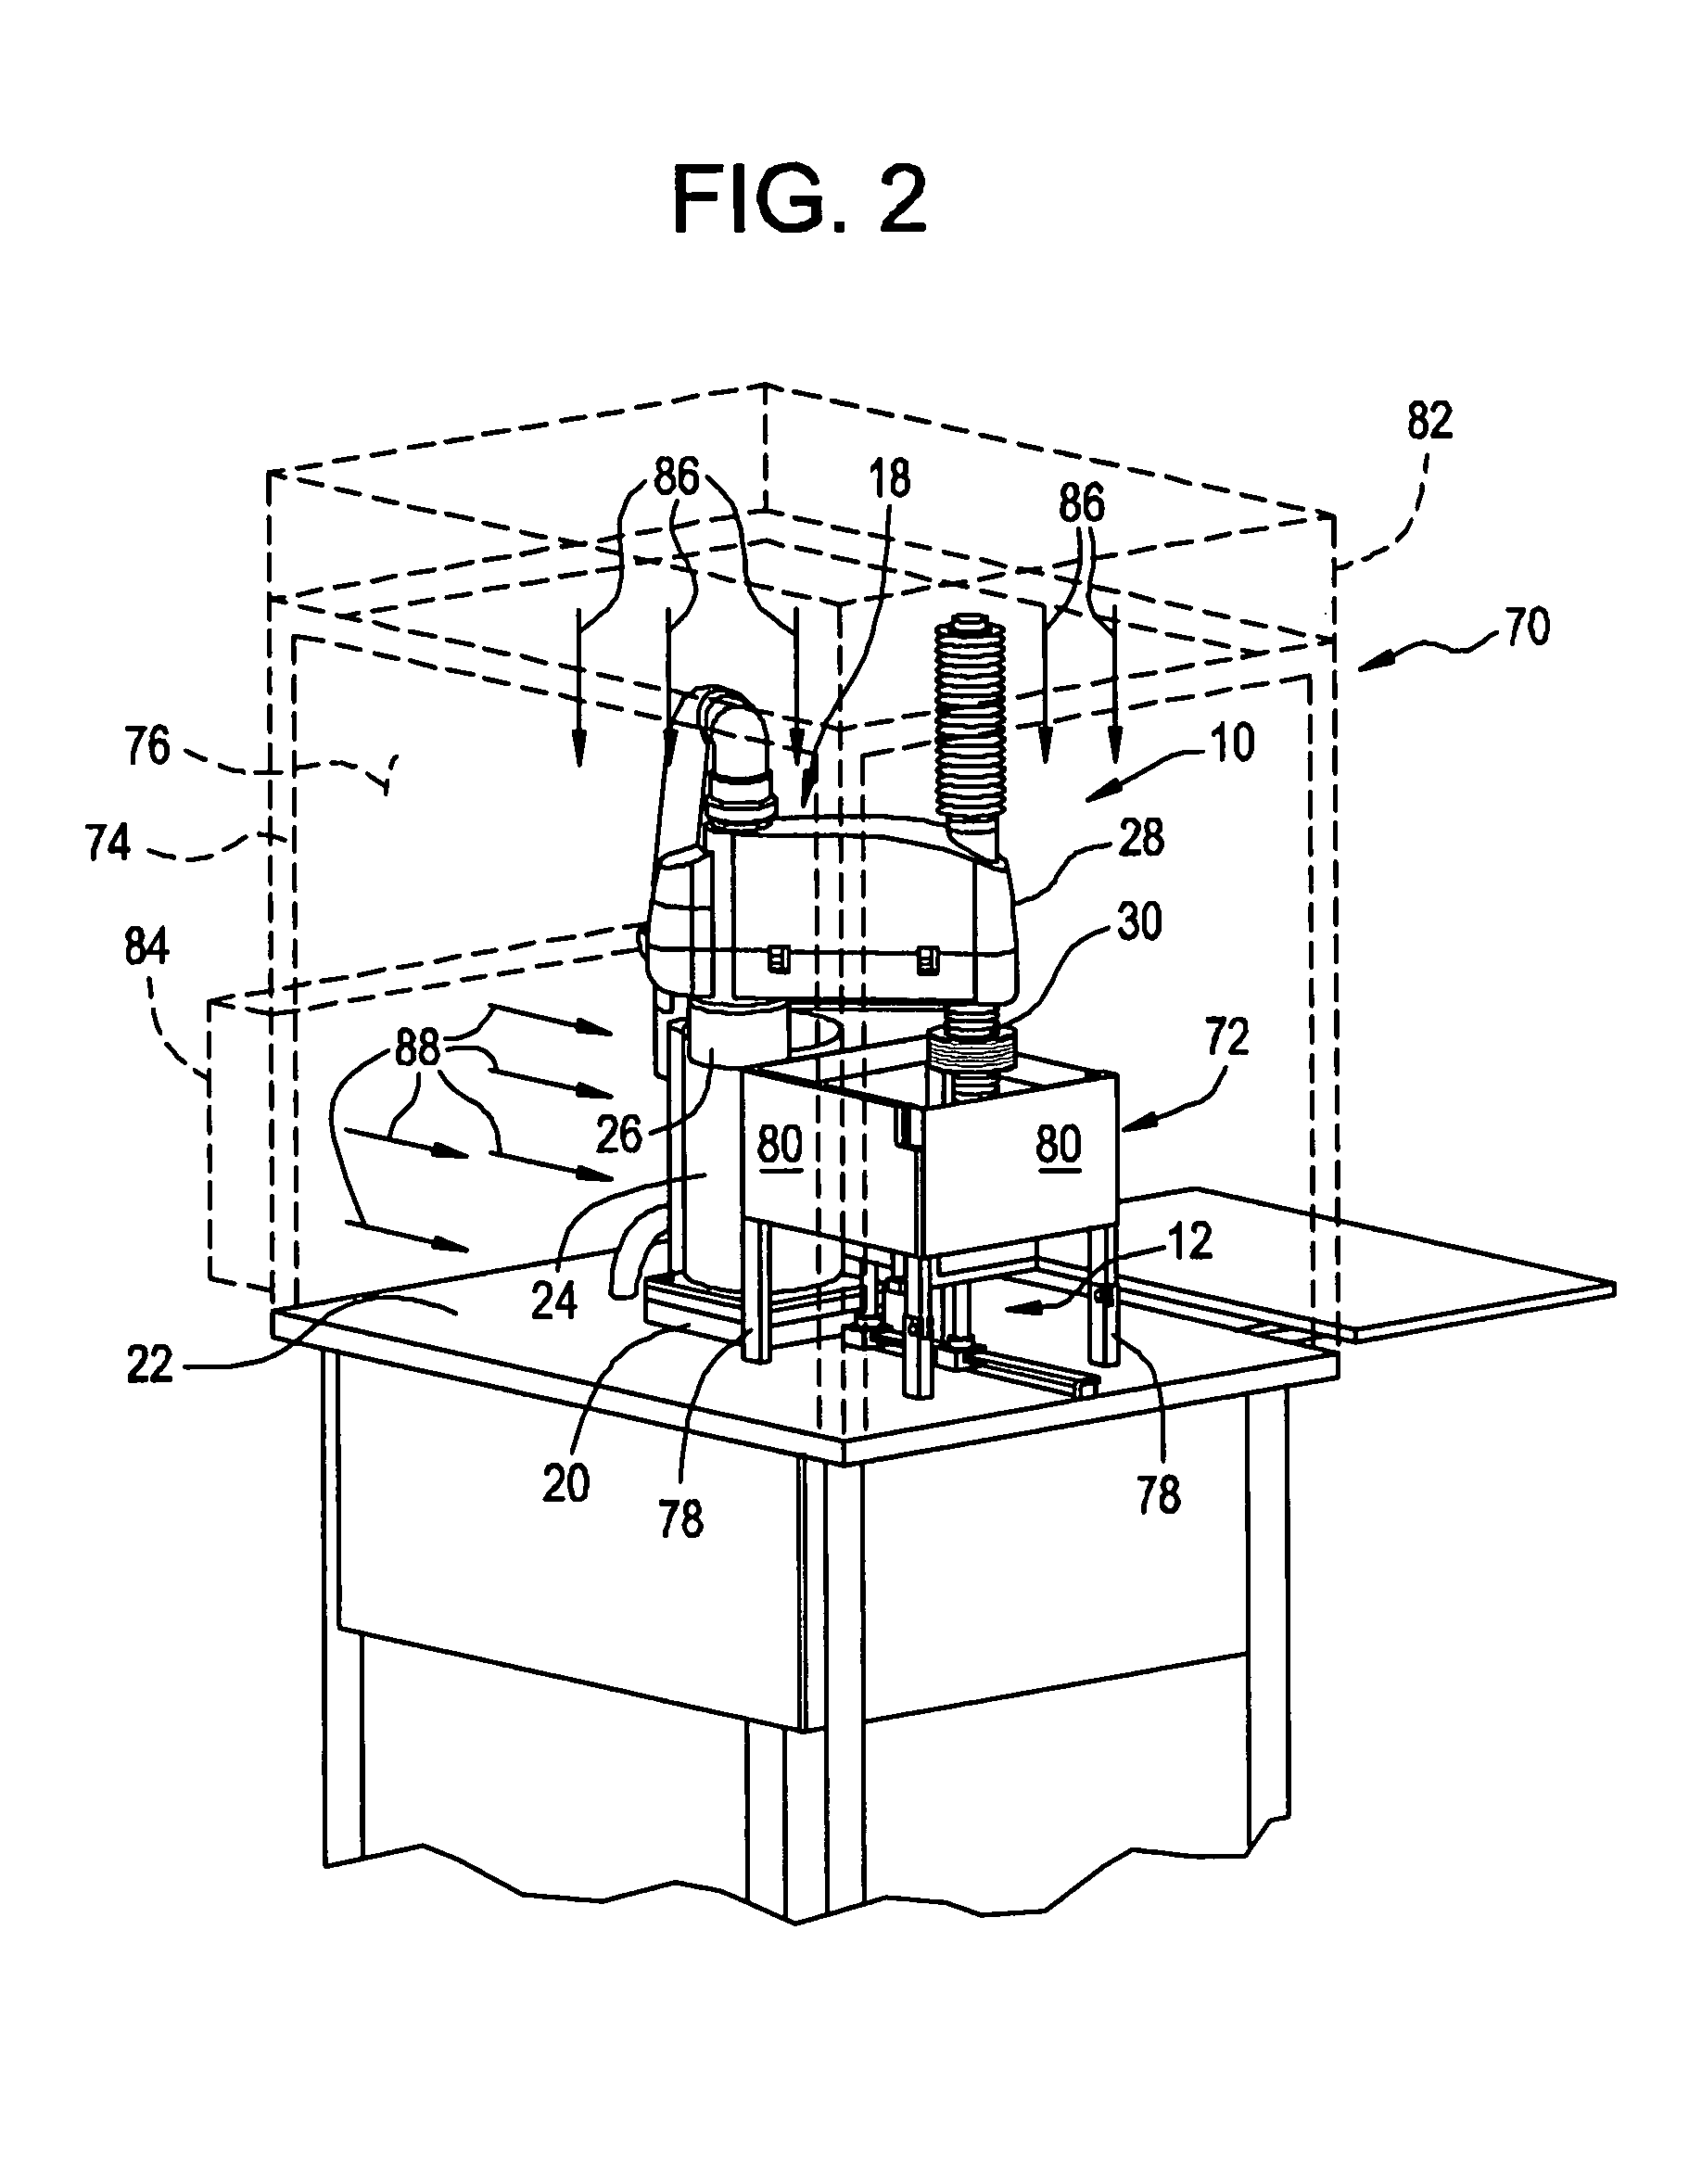 Apparatus and method for needle filling and laser resealing